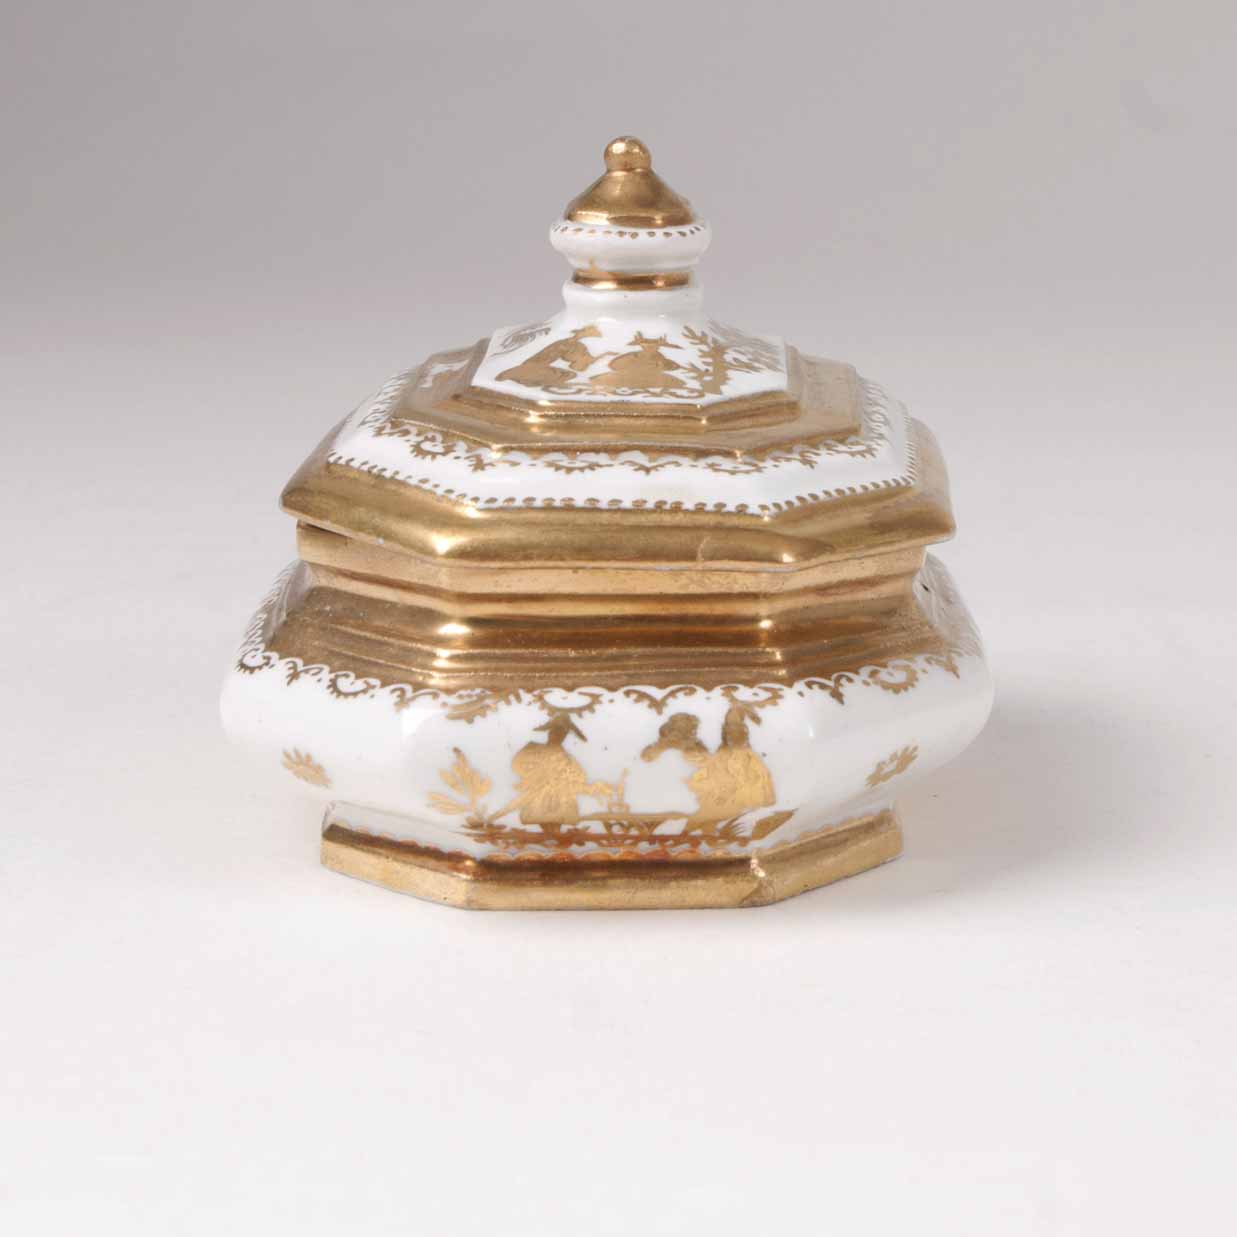 A rare Böttger sugar-box with gold chinoiseries from Augsburg - image 4